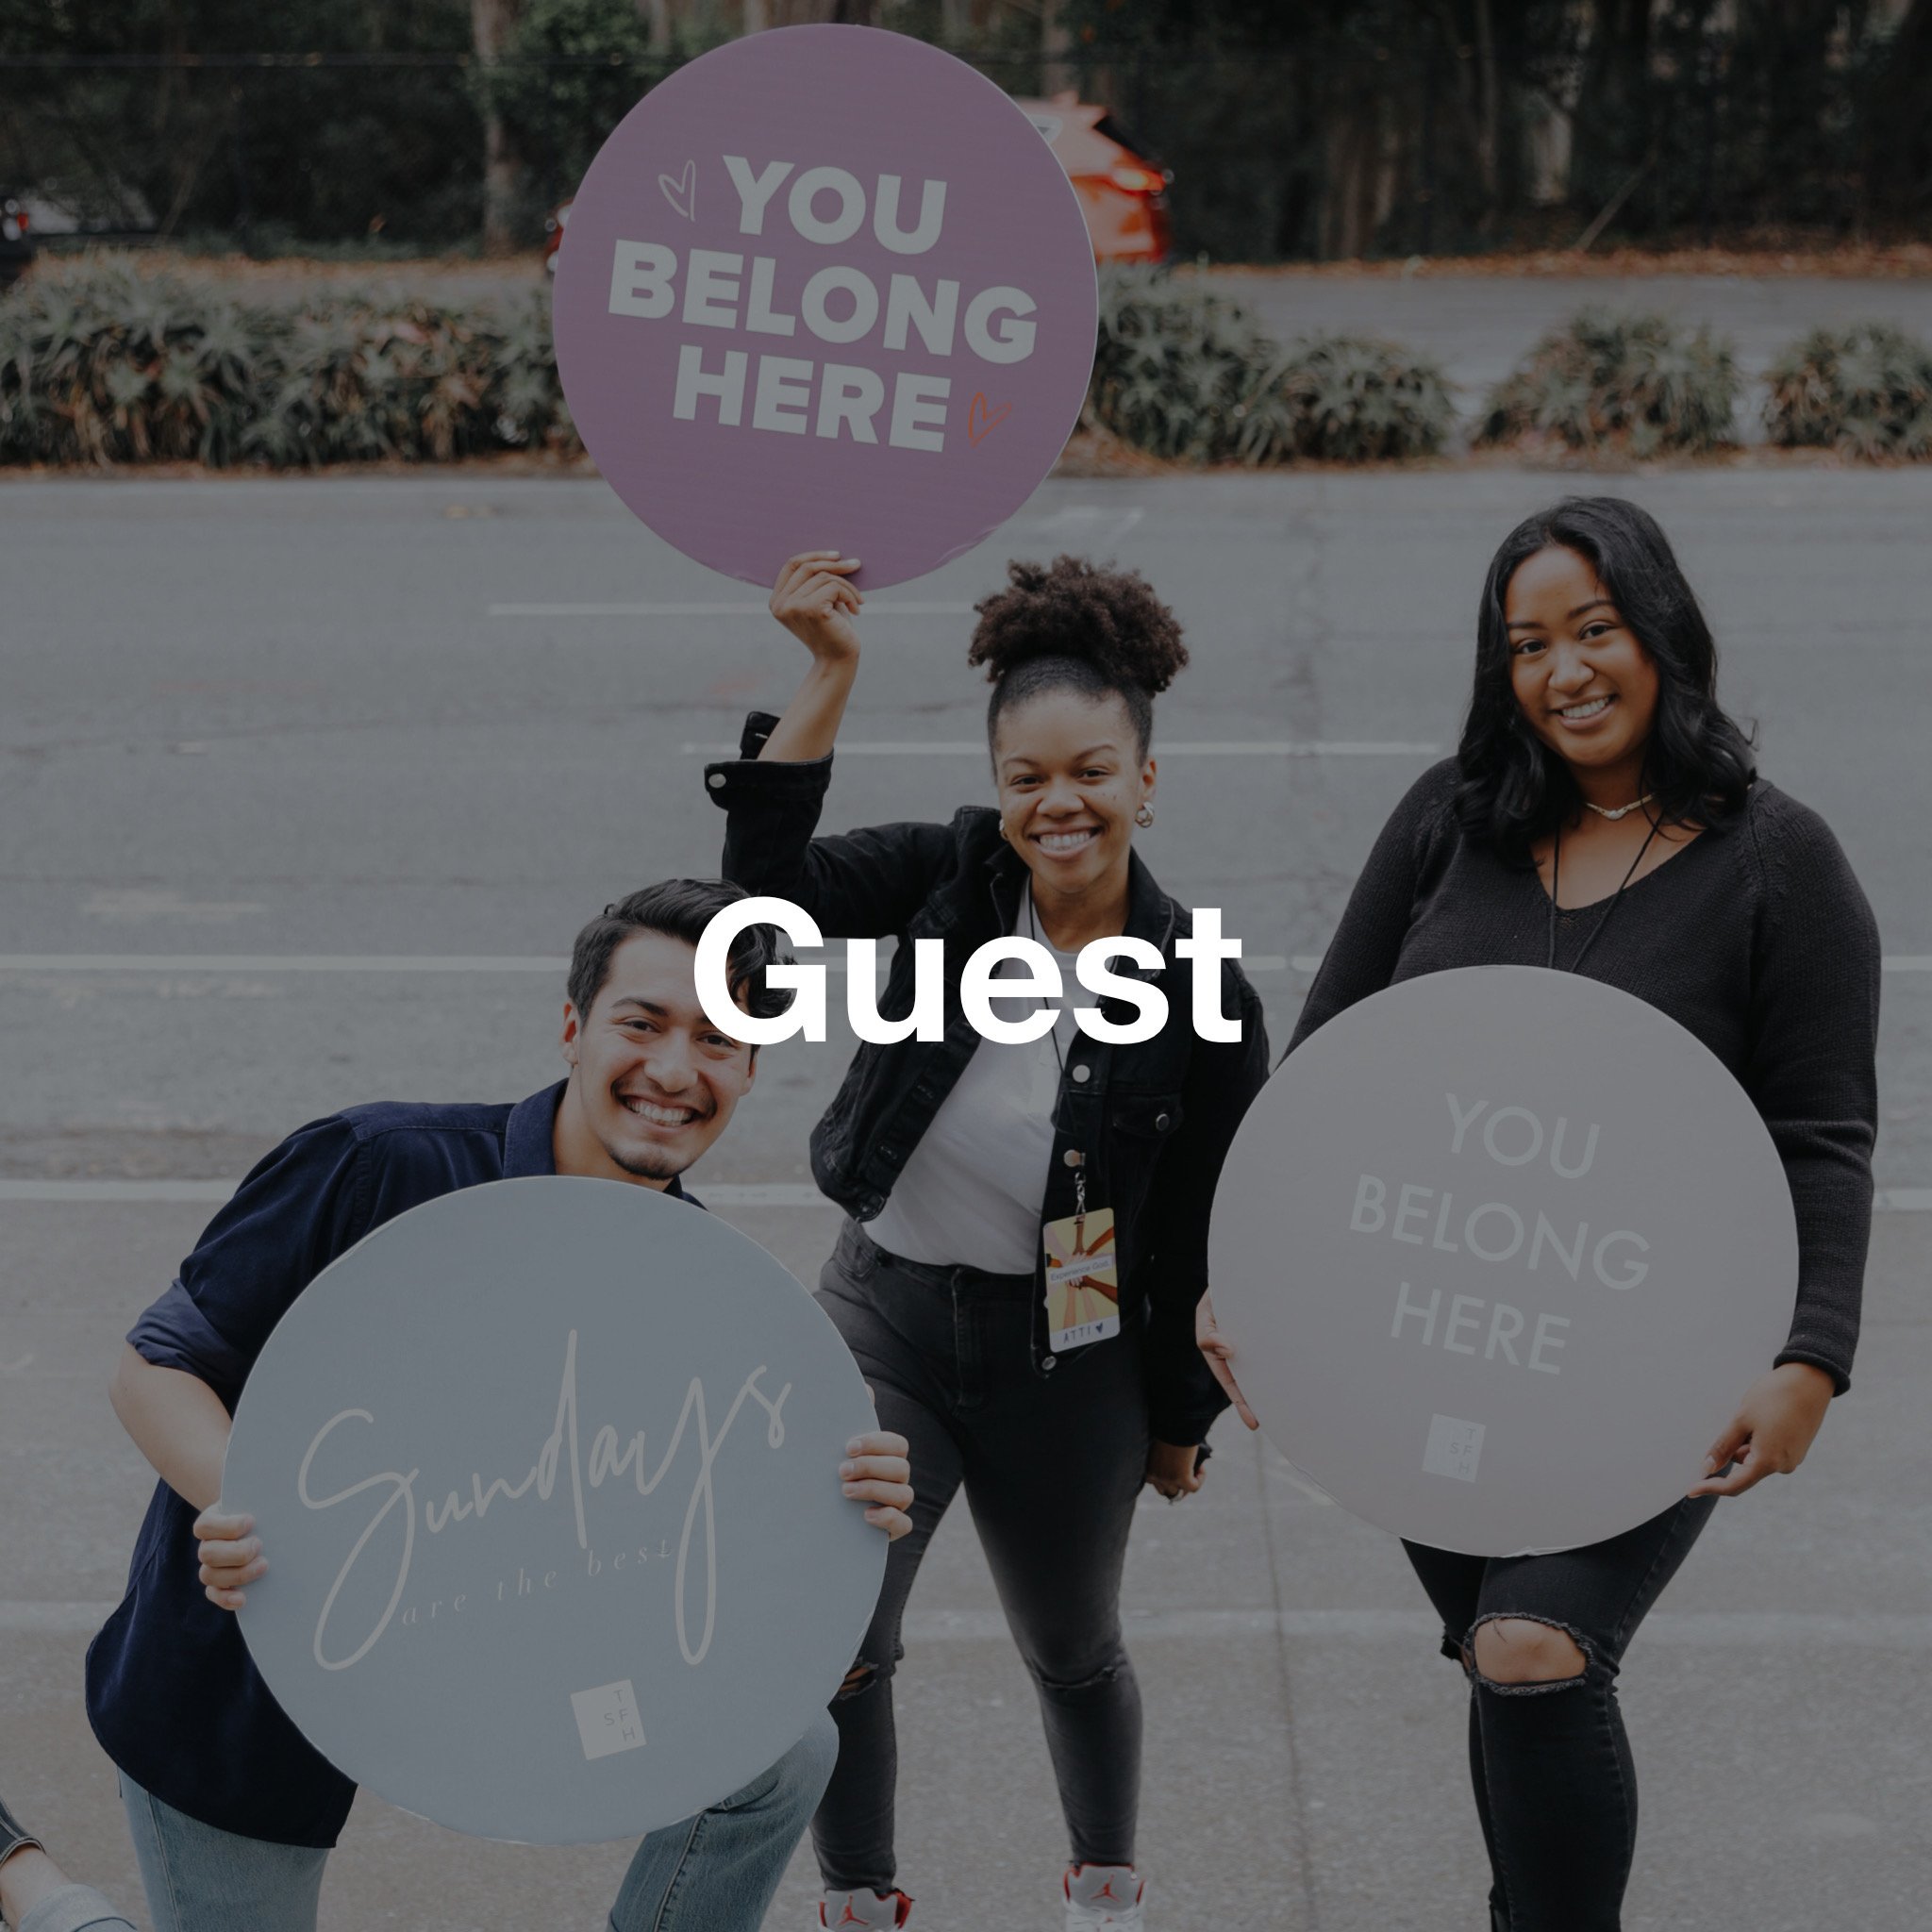 Join the Guest Team